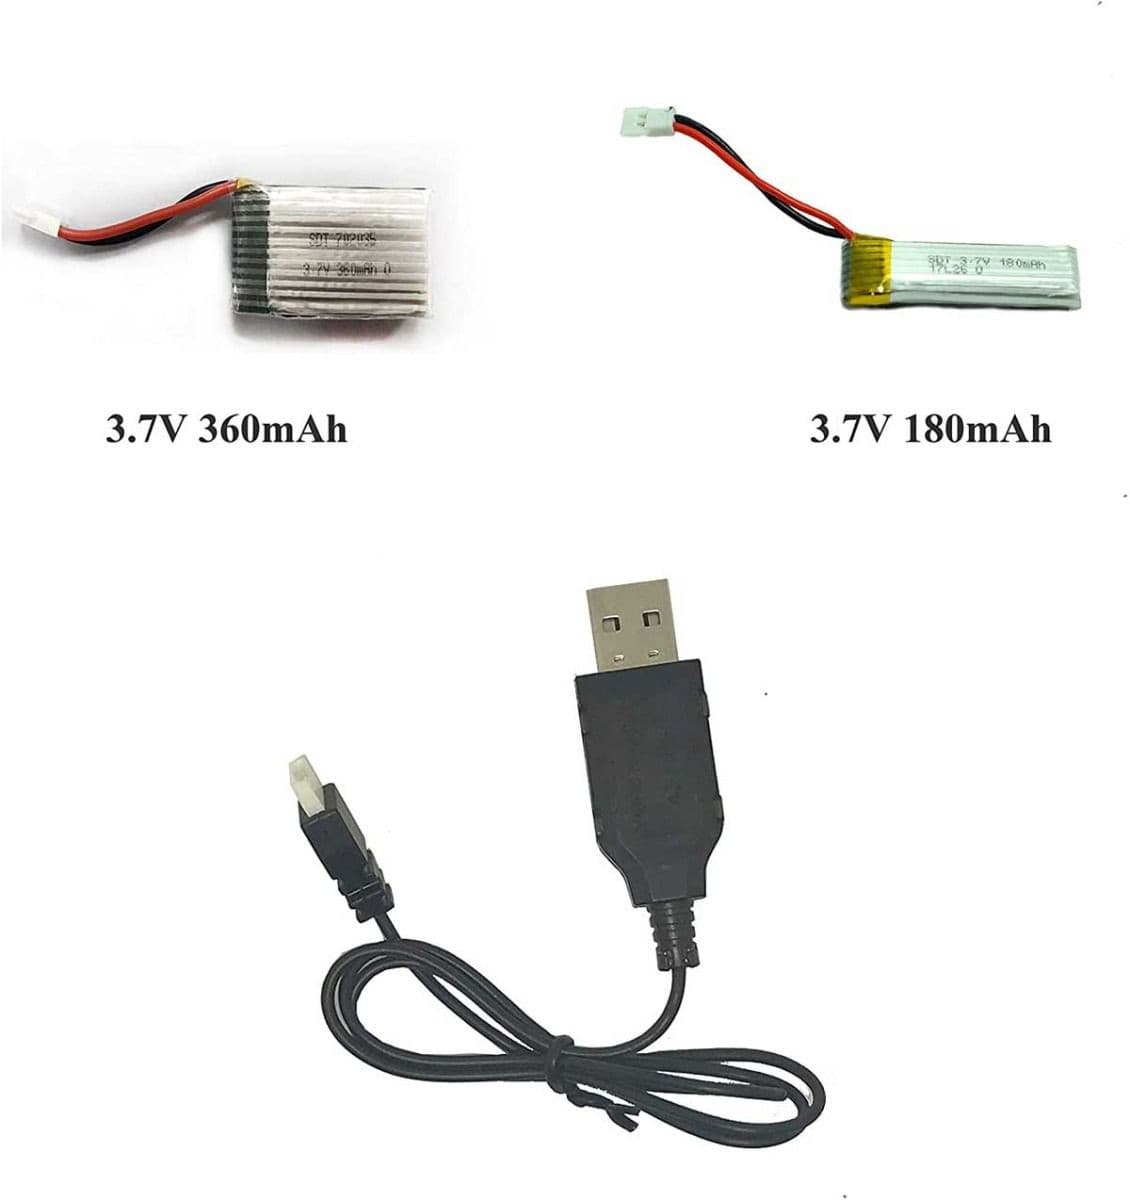 Morgen Nyttig anklageren VOLANTEXRC RC Plane Spare Parts: 1S 3.7V USB charger for RC Airplane